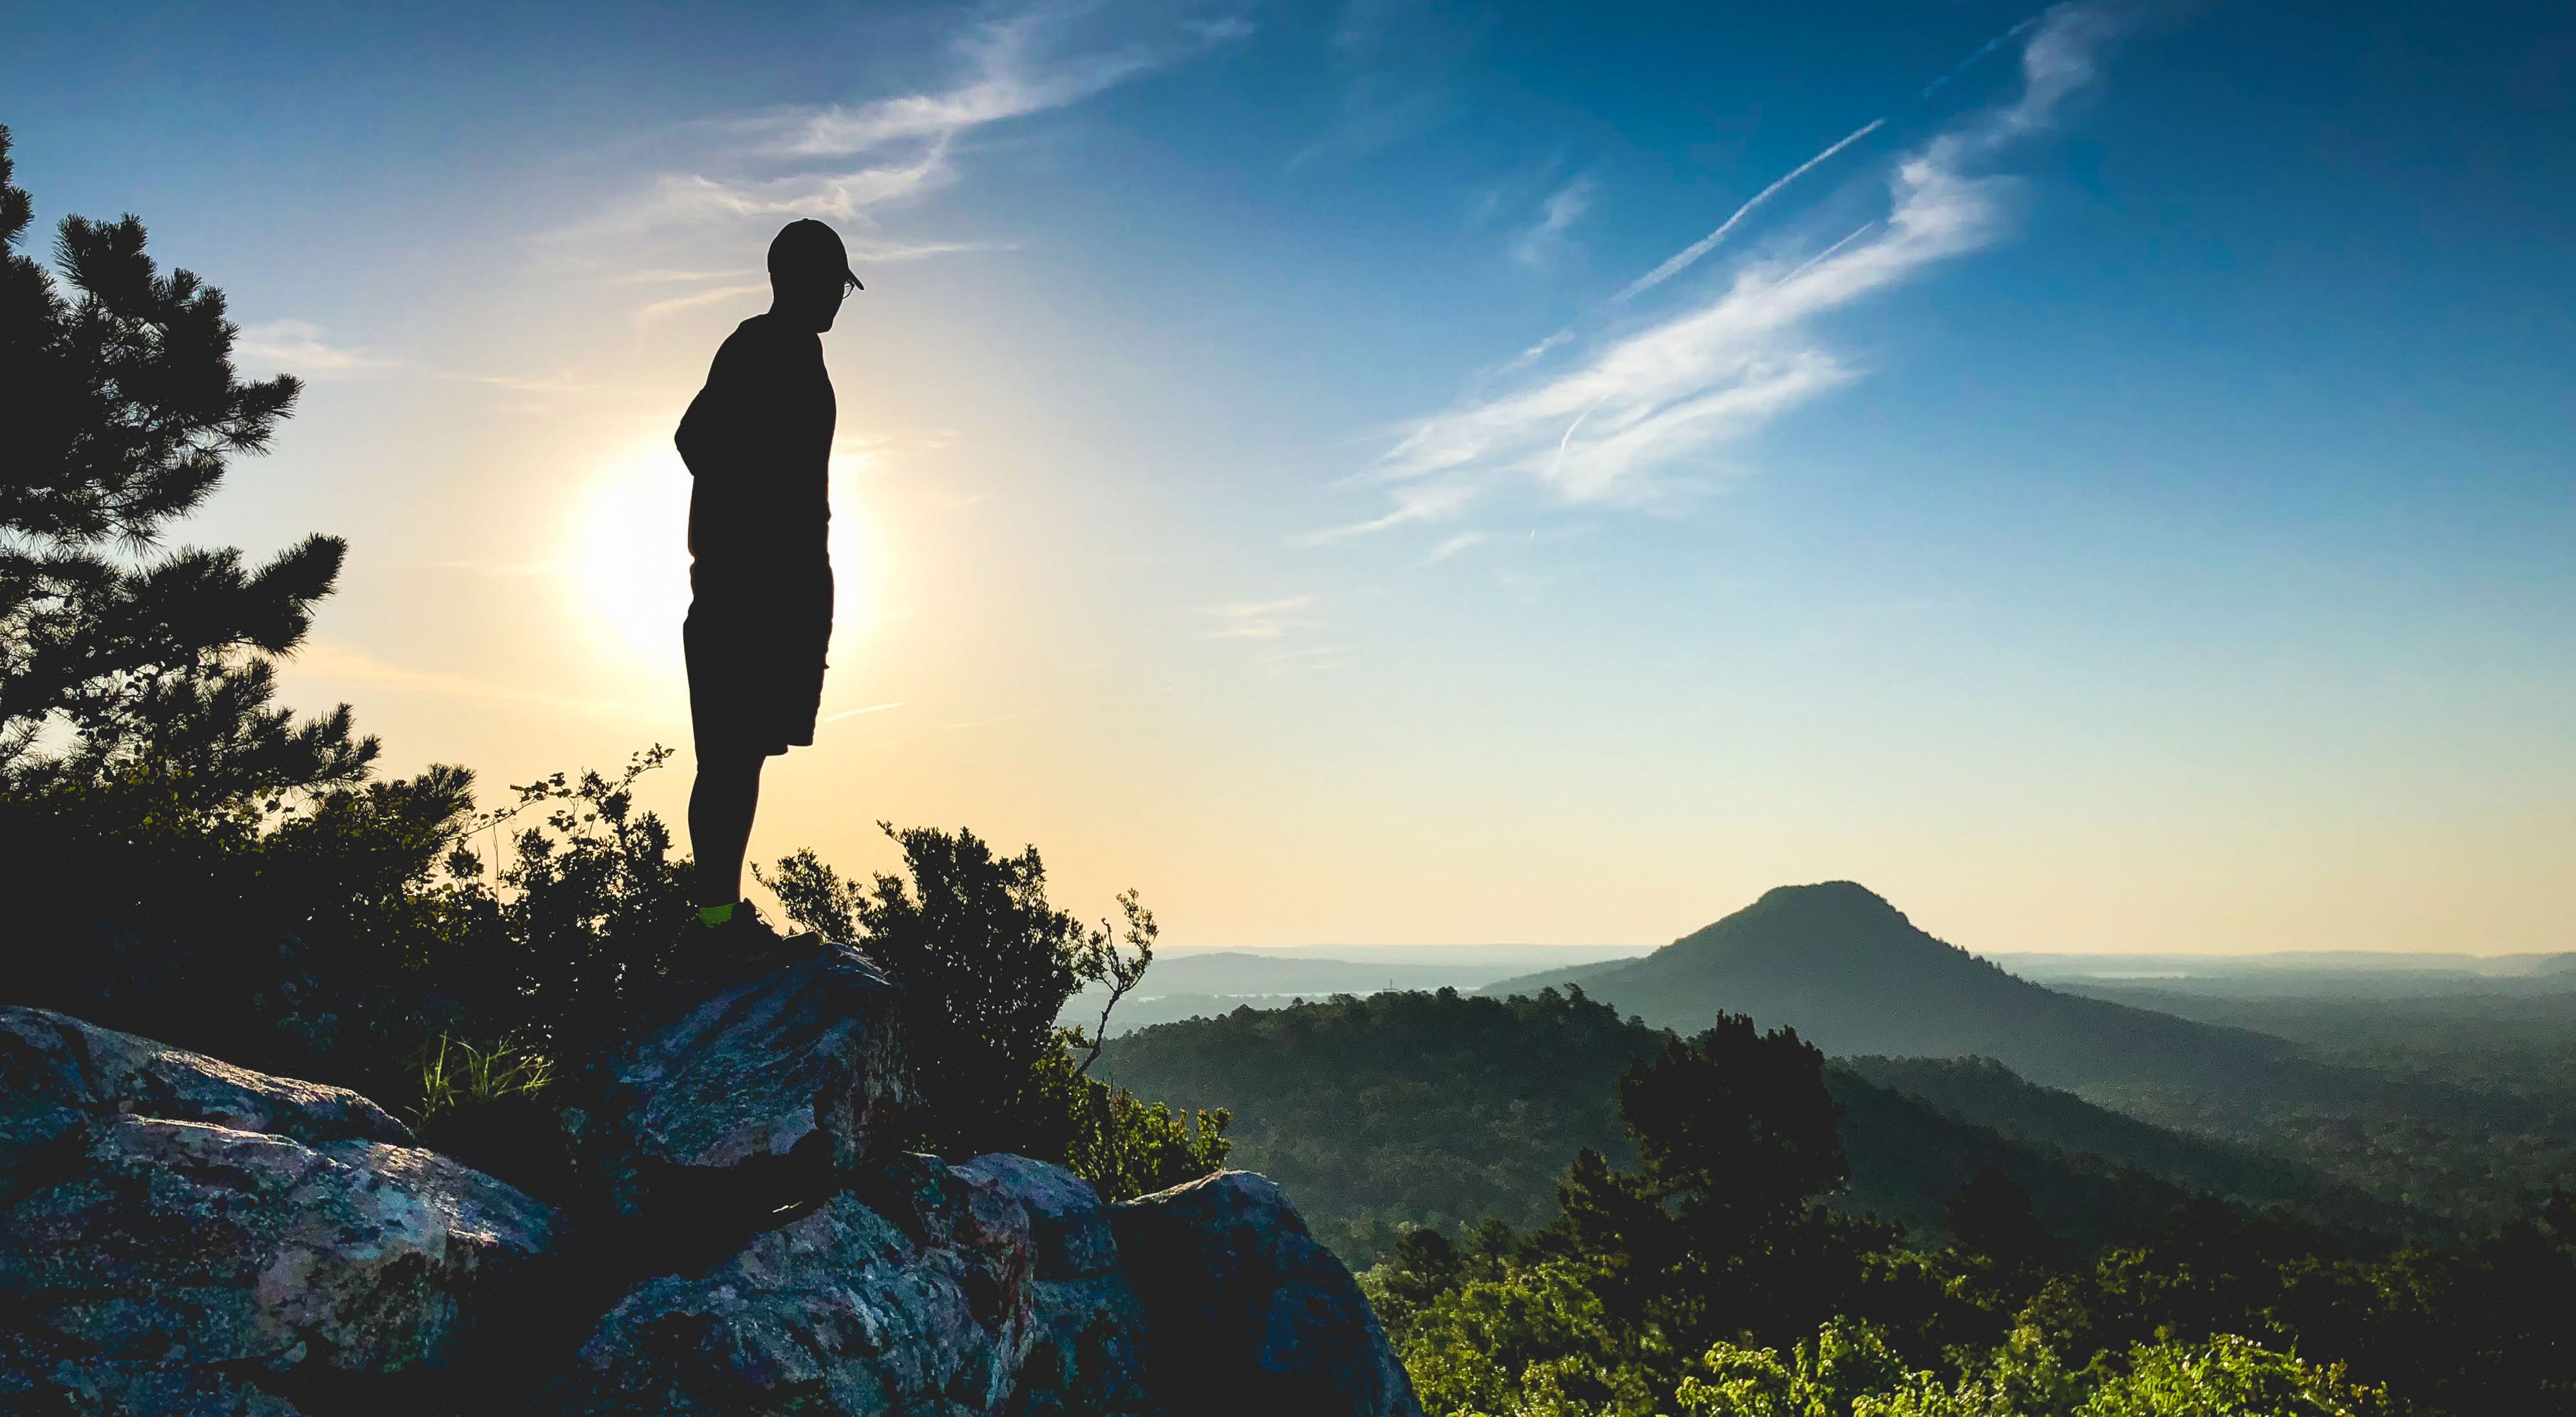 A hiker silhouetted against the sunset as he looks out over hills and valleys.